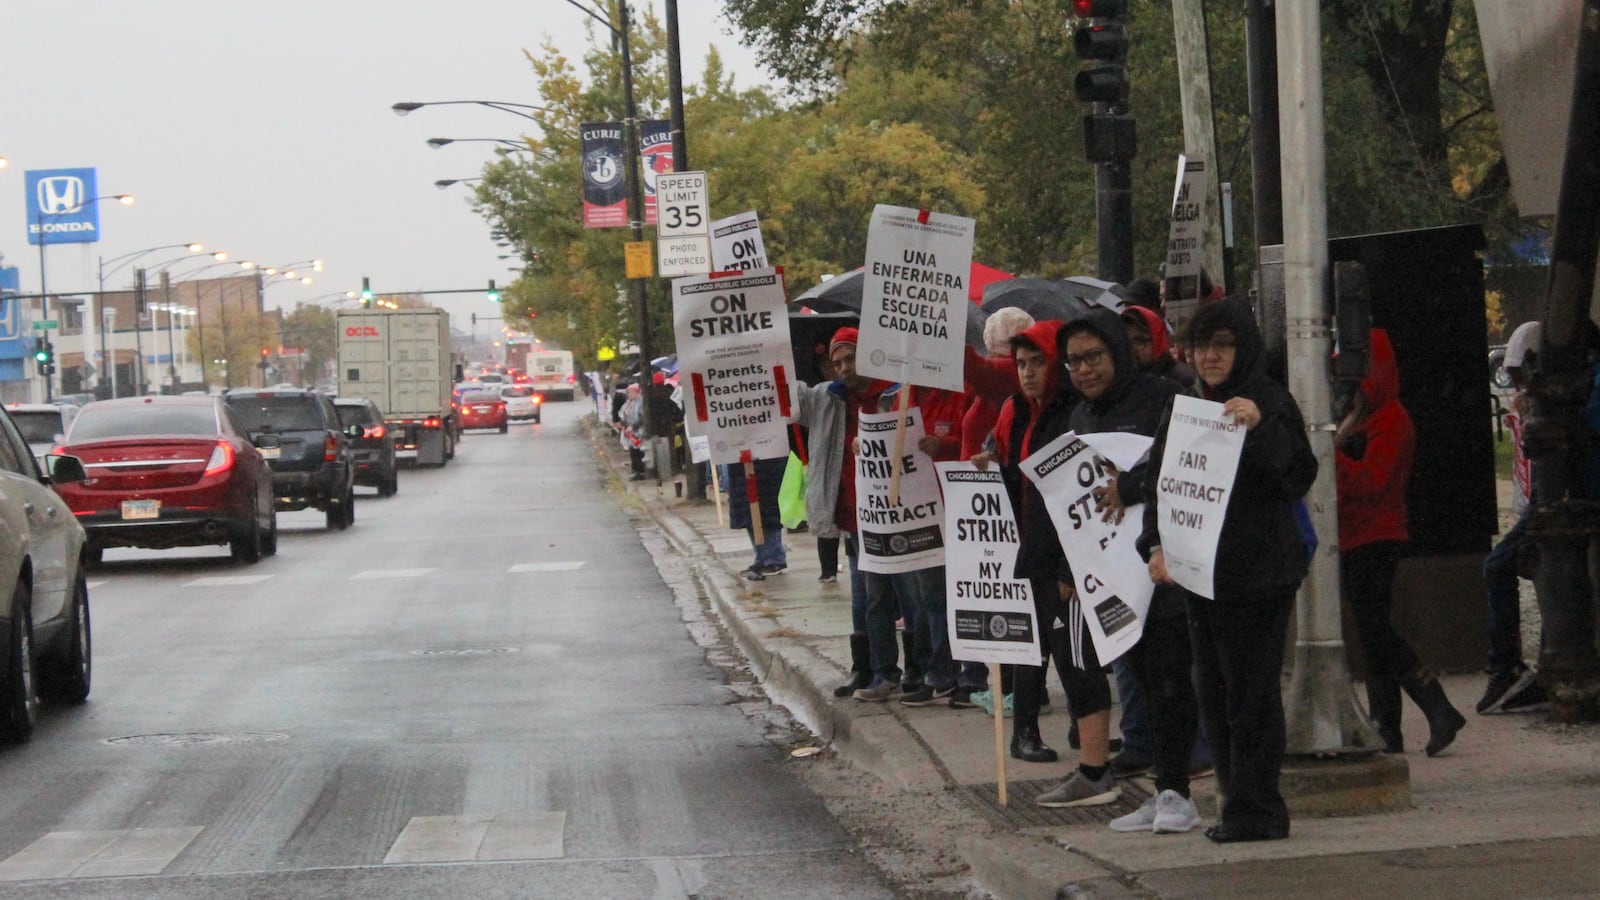 Striking Chicago teachers hold signs in front of Curie Metropolitan High School at the start of a lengthy picket line down Pulaski Road. Rain in the forecast leads some passersby to drop off ponchos.